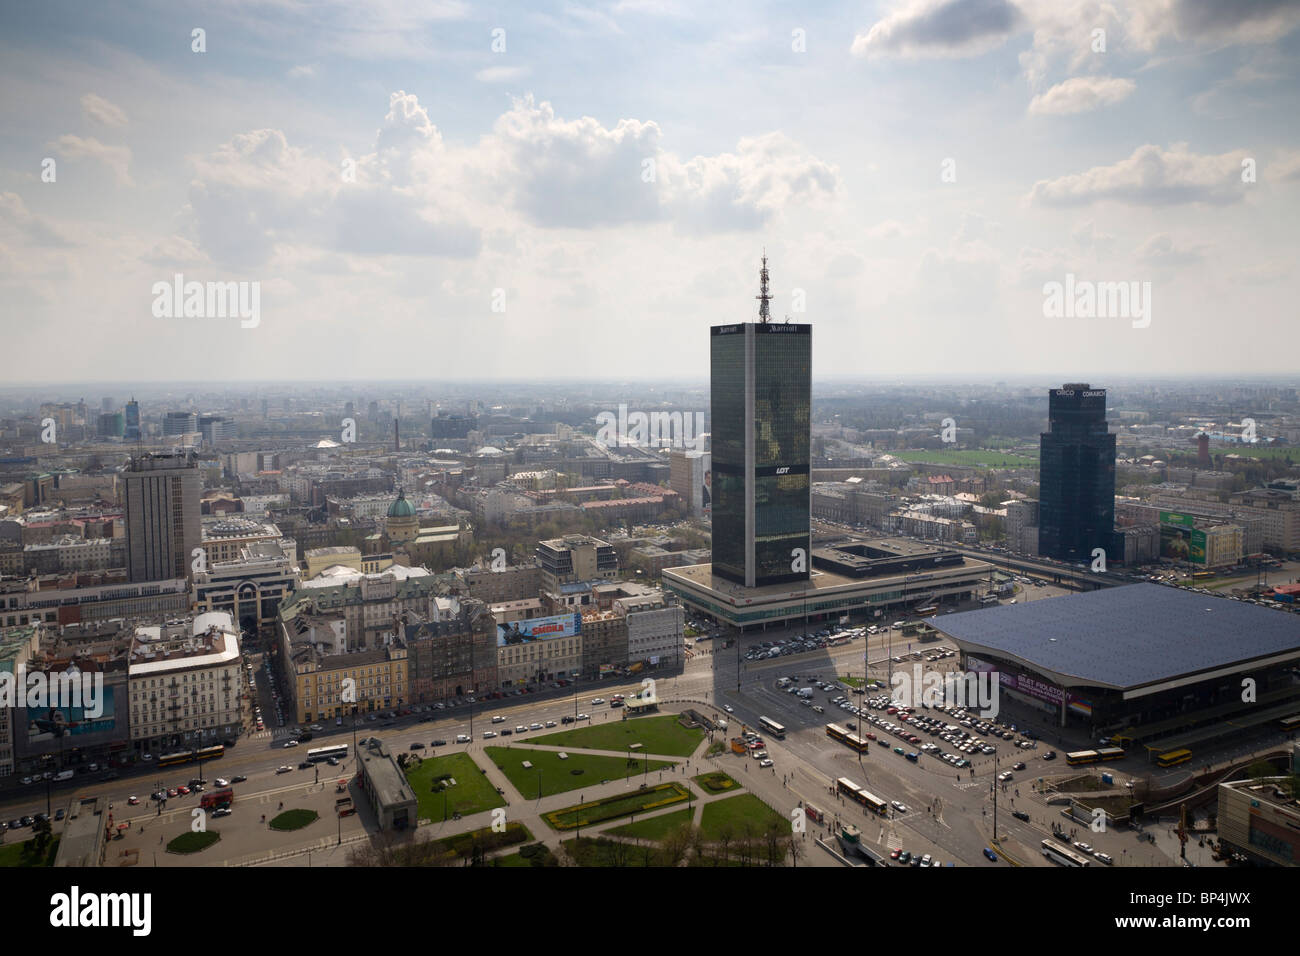 Marriott Hotel and Warsaw Central Rail Station. The view is from the Palace of Culture and Science, Warsaw Poland. Stock Photo